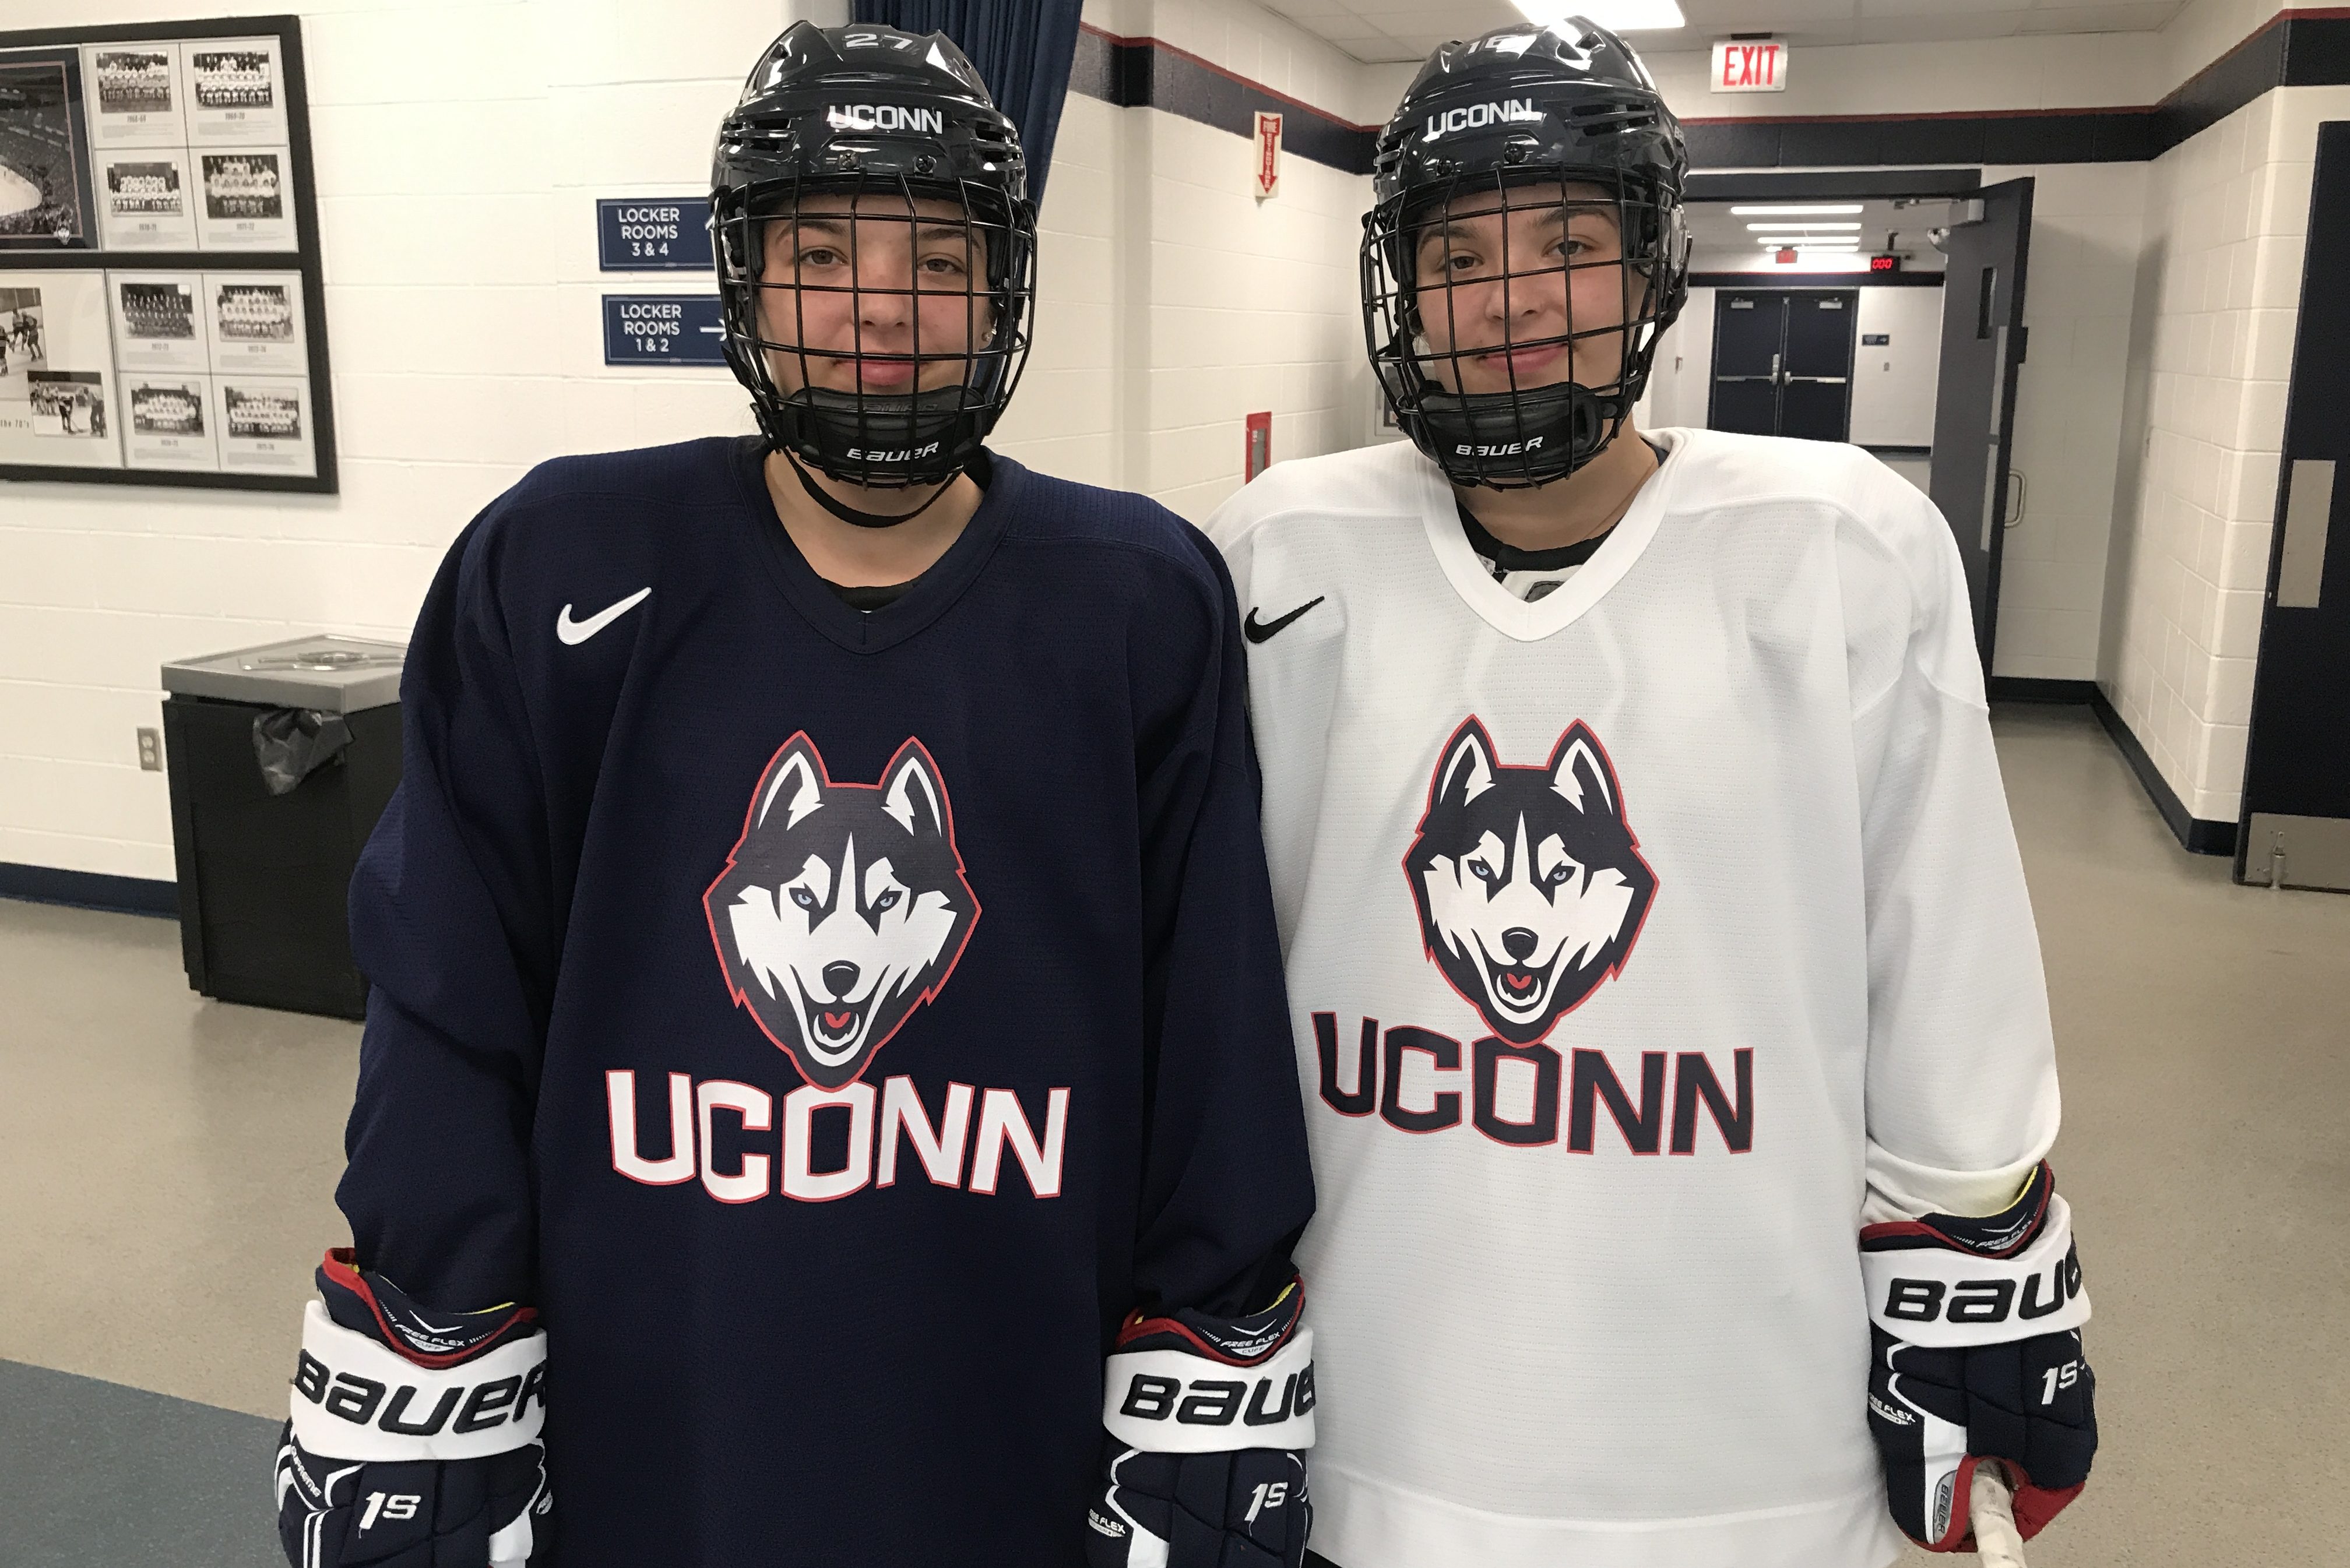 Freshmen Morgan, left, a forward, and Taylor Wabick, a defender, at the Freitas Ice Forum. 'We have always been on the same team, except for one game,' says Taylor. (Steve Lewis/UConn Photo)